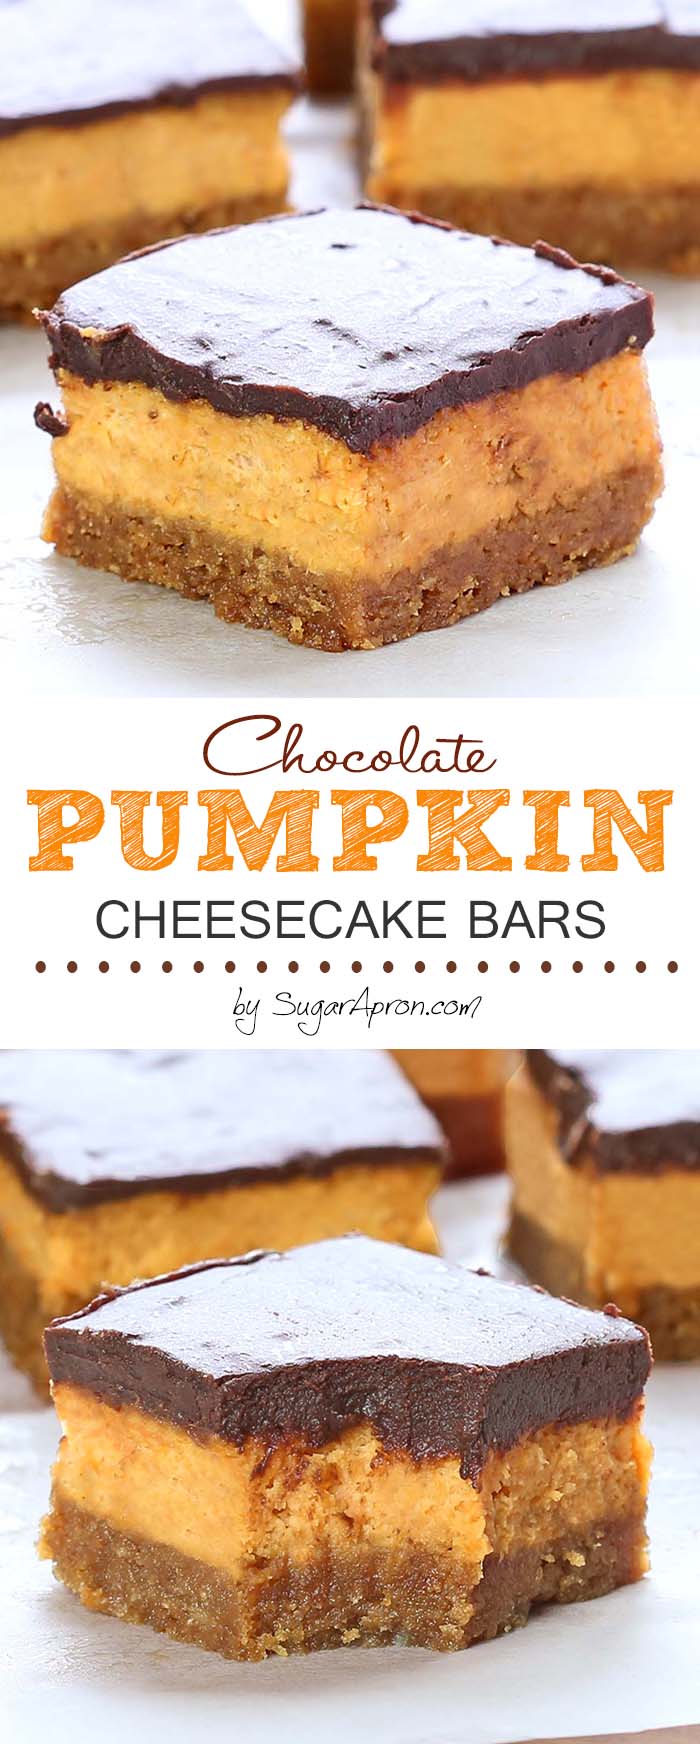 These bars are creamy, chocolate-ly, packed with pumpkin and cream cheese. #popular